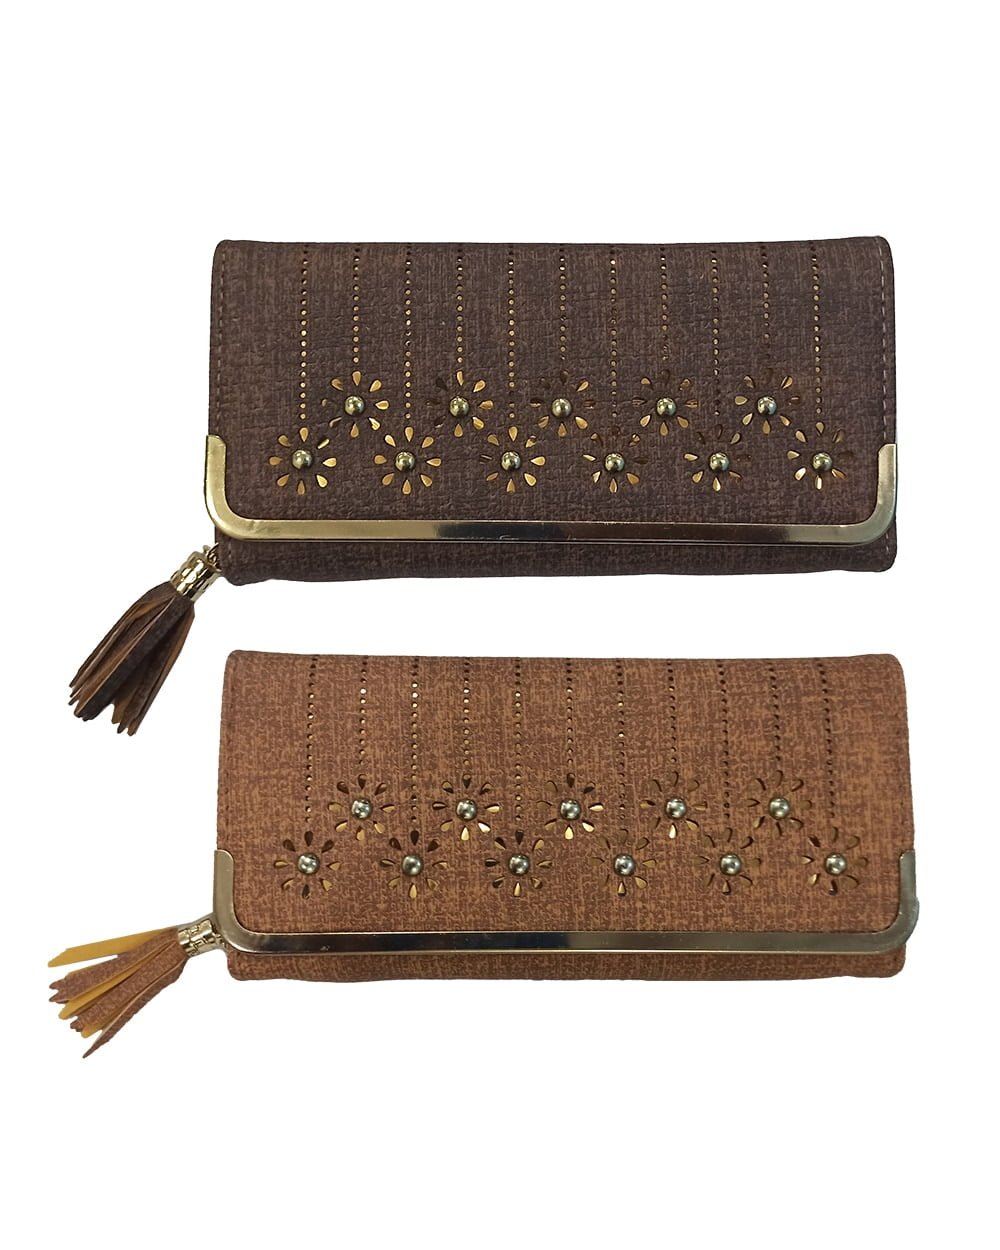 Upgrade Your Style and Functionality with the Multi Pocket Clutch with Bead Detail